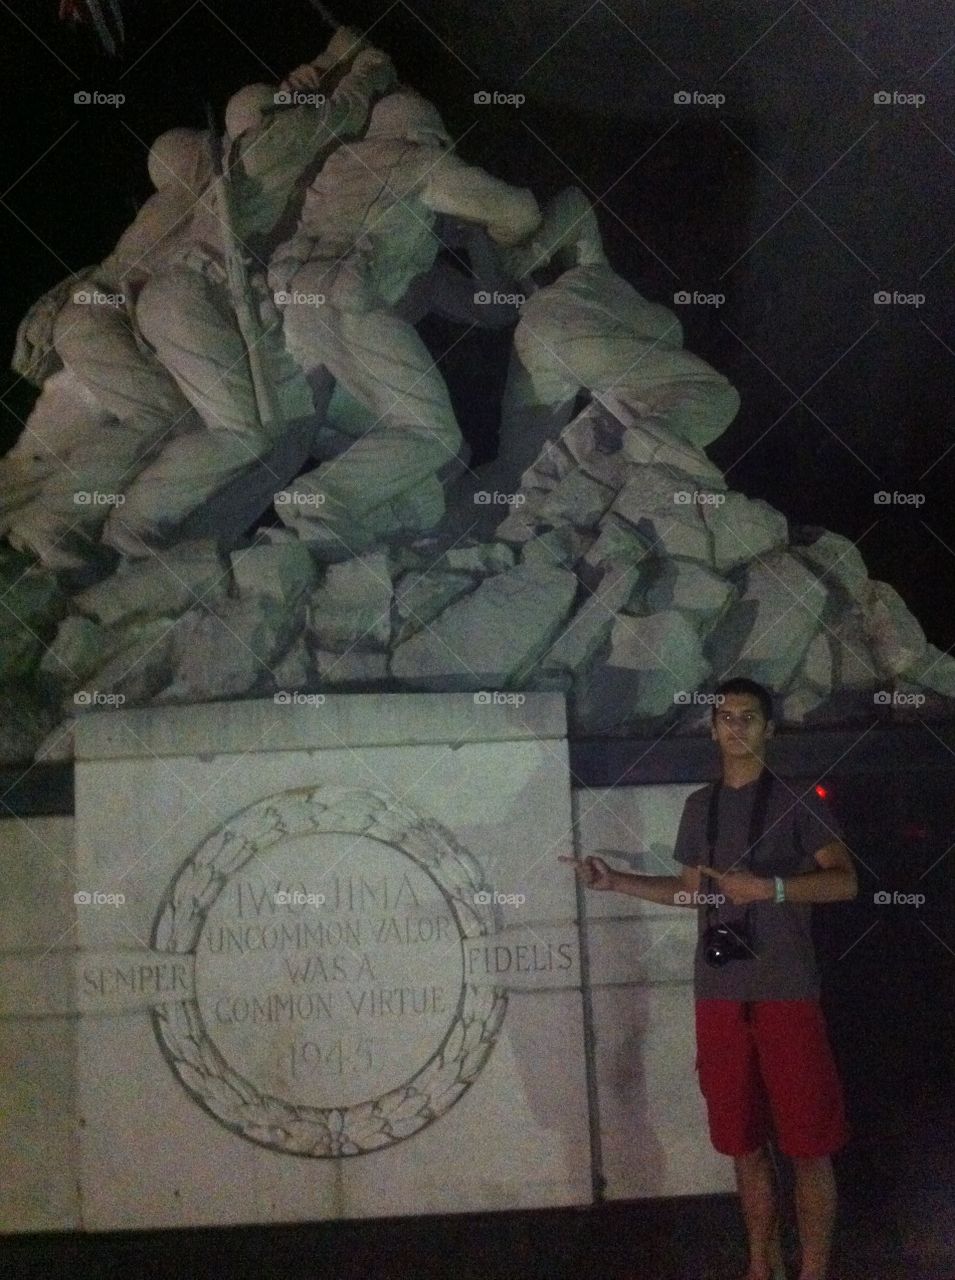 One of the best monuments!!